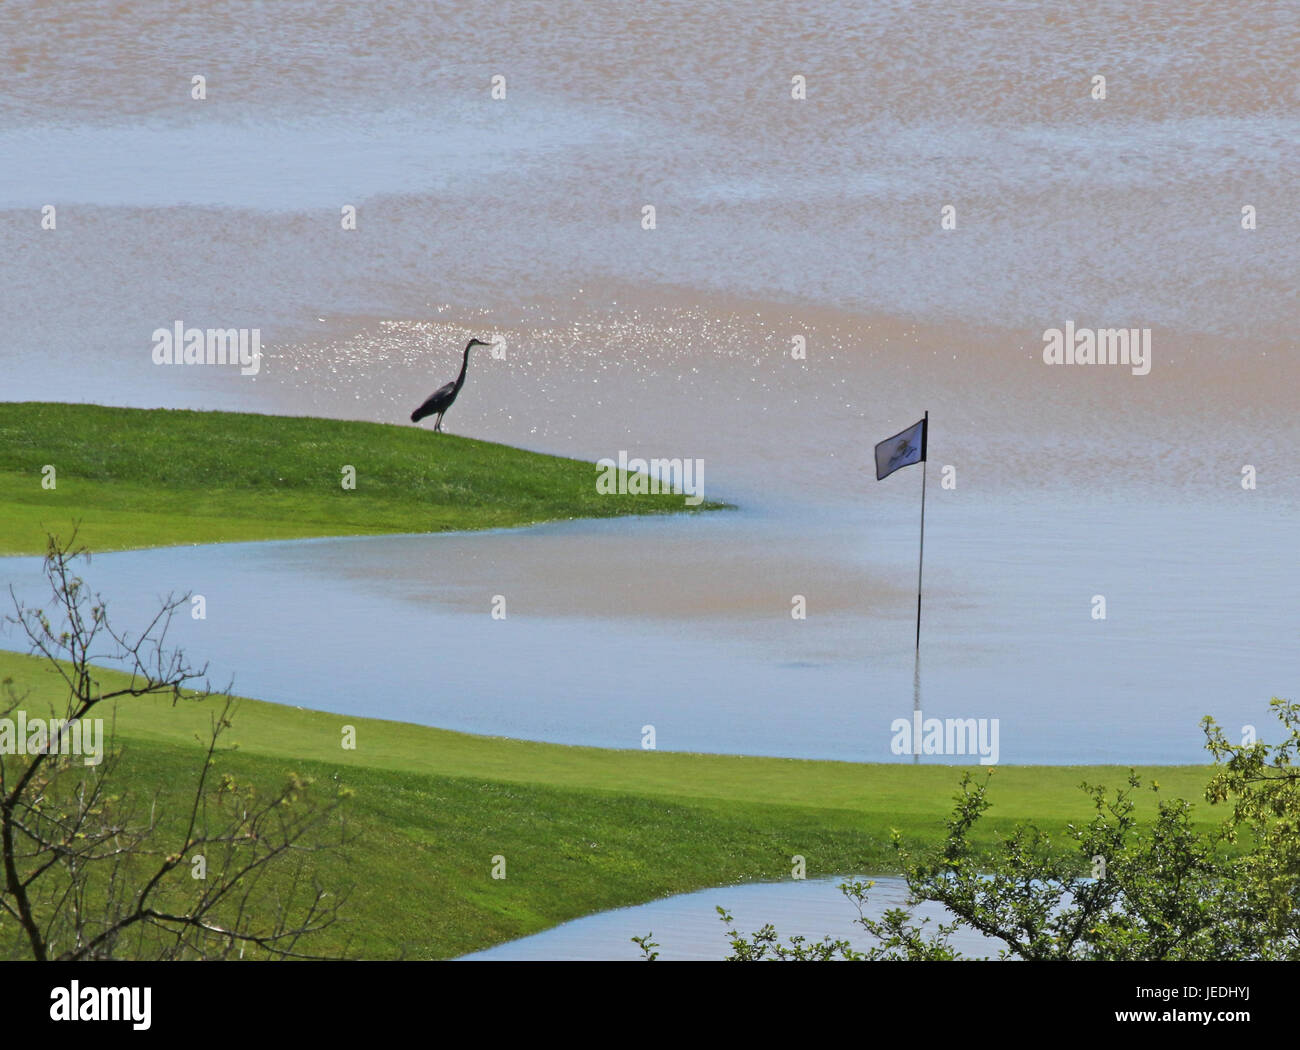 Kitchener, Ontario, Canada. 24th June, 2017. A Great Blue Heron wading near a badly flooded hole at Deer Ridge Golf Club caused by heavy rains overflowing the Grand River. Credit: Chris Hill/Alamy Live News Credit: Chris Hill/Alamy Live News Stock Photo